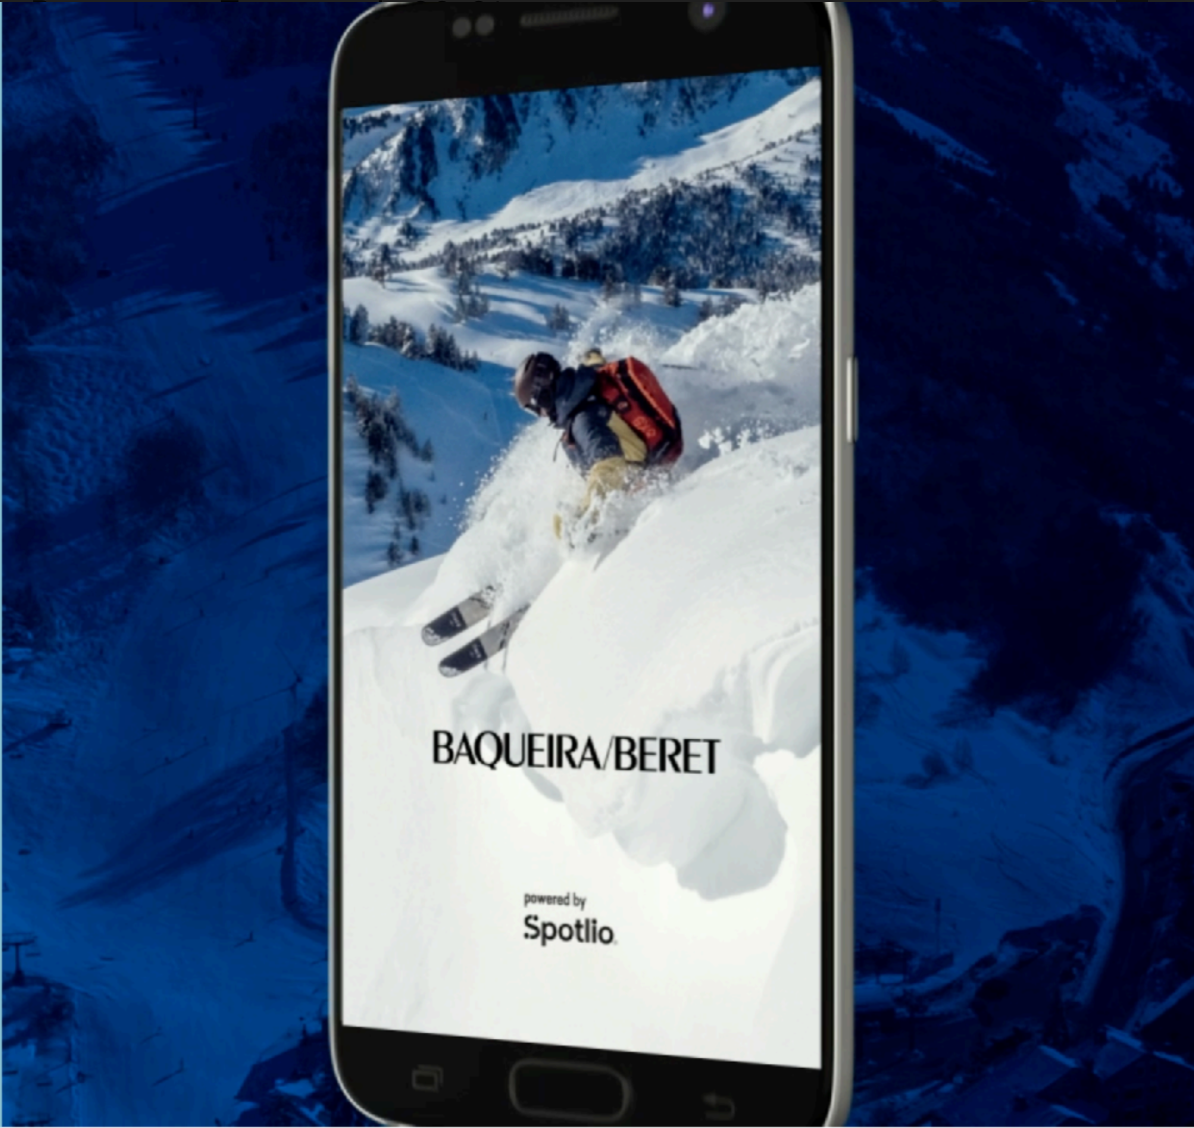 Baqueira Beret is committed to technology and improvements in snow production